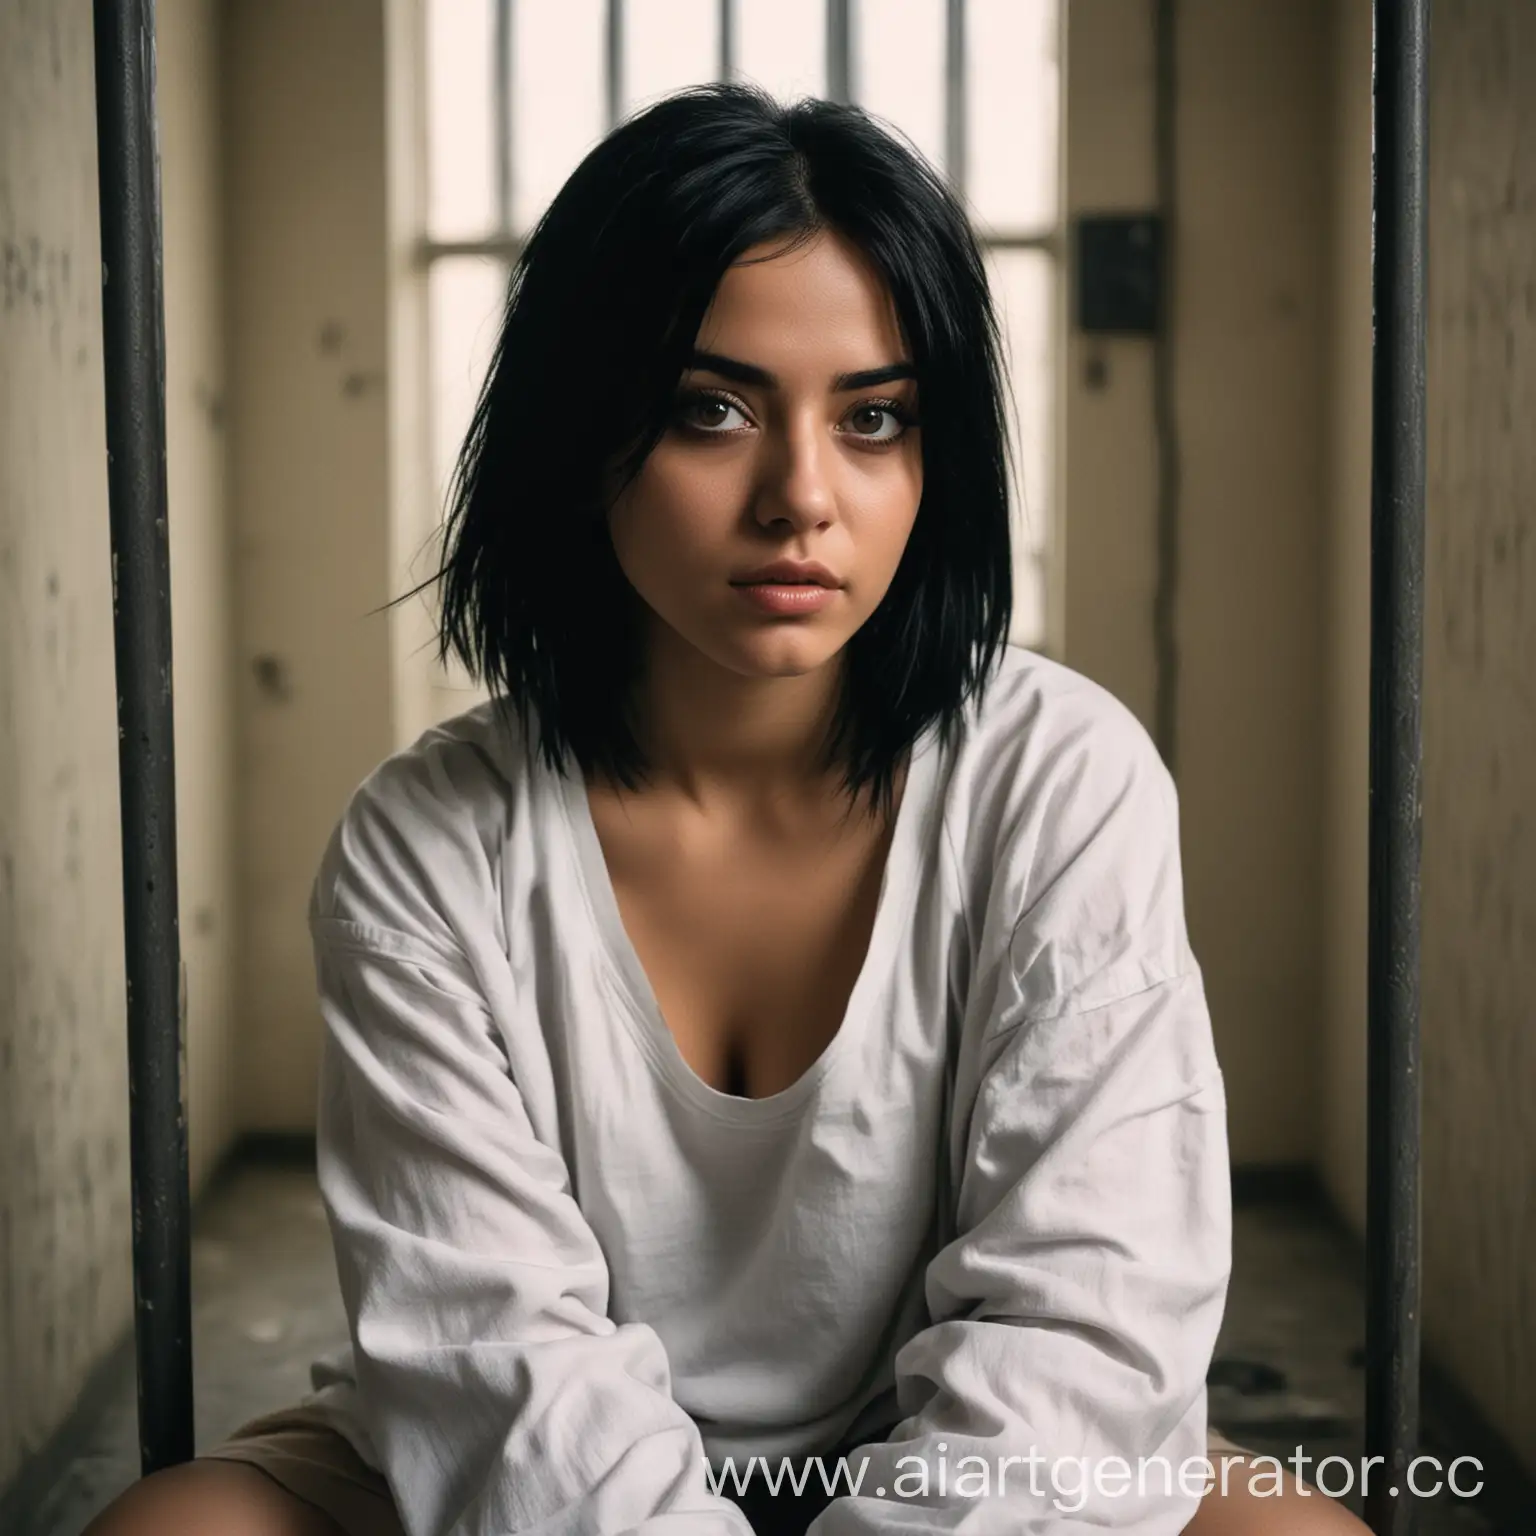 Lonely-Girl-with-Dark-Hair-and-Eyes-in-Prison-Cell